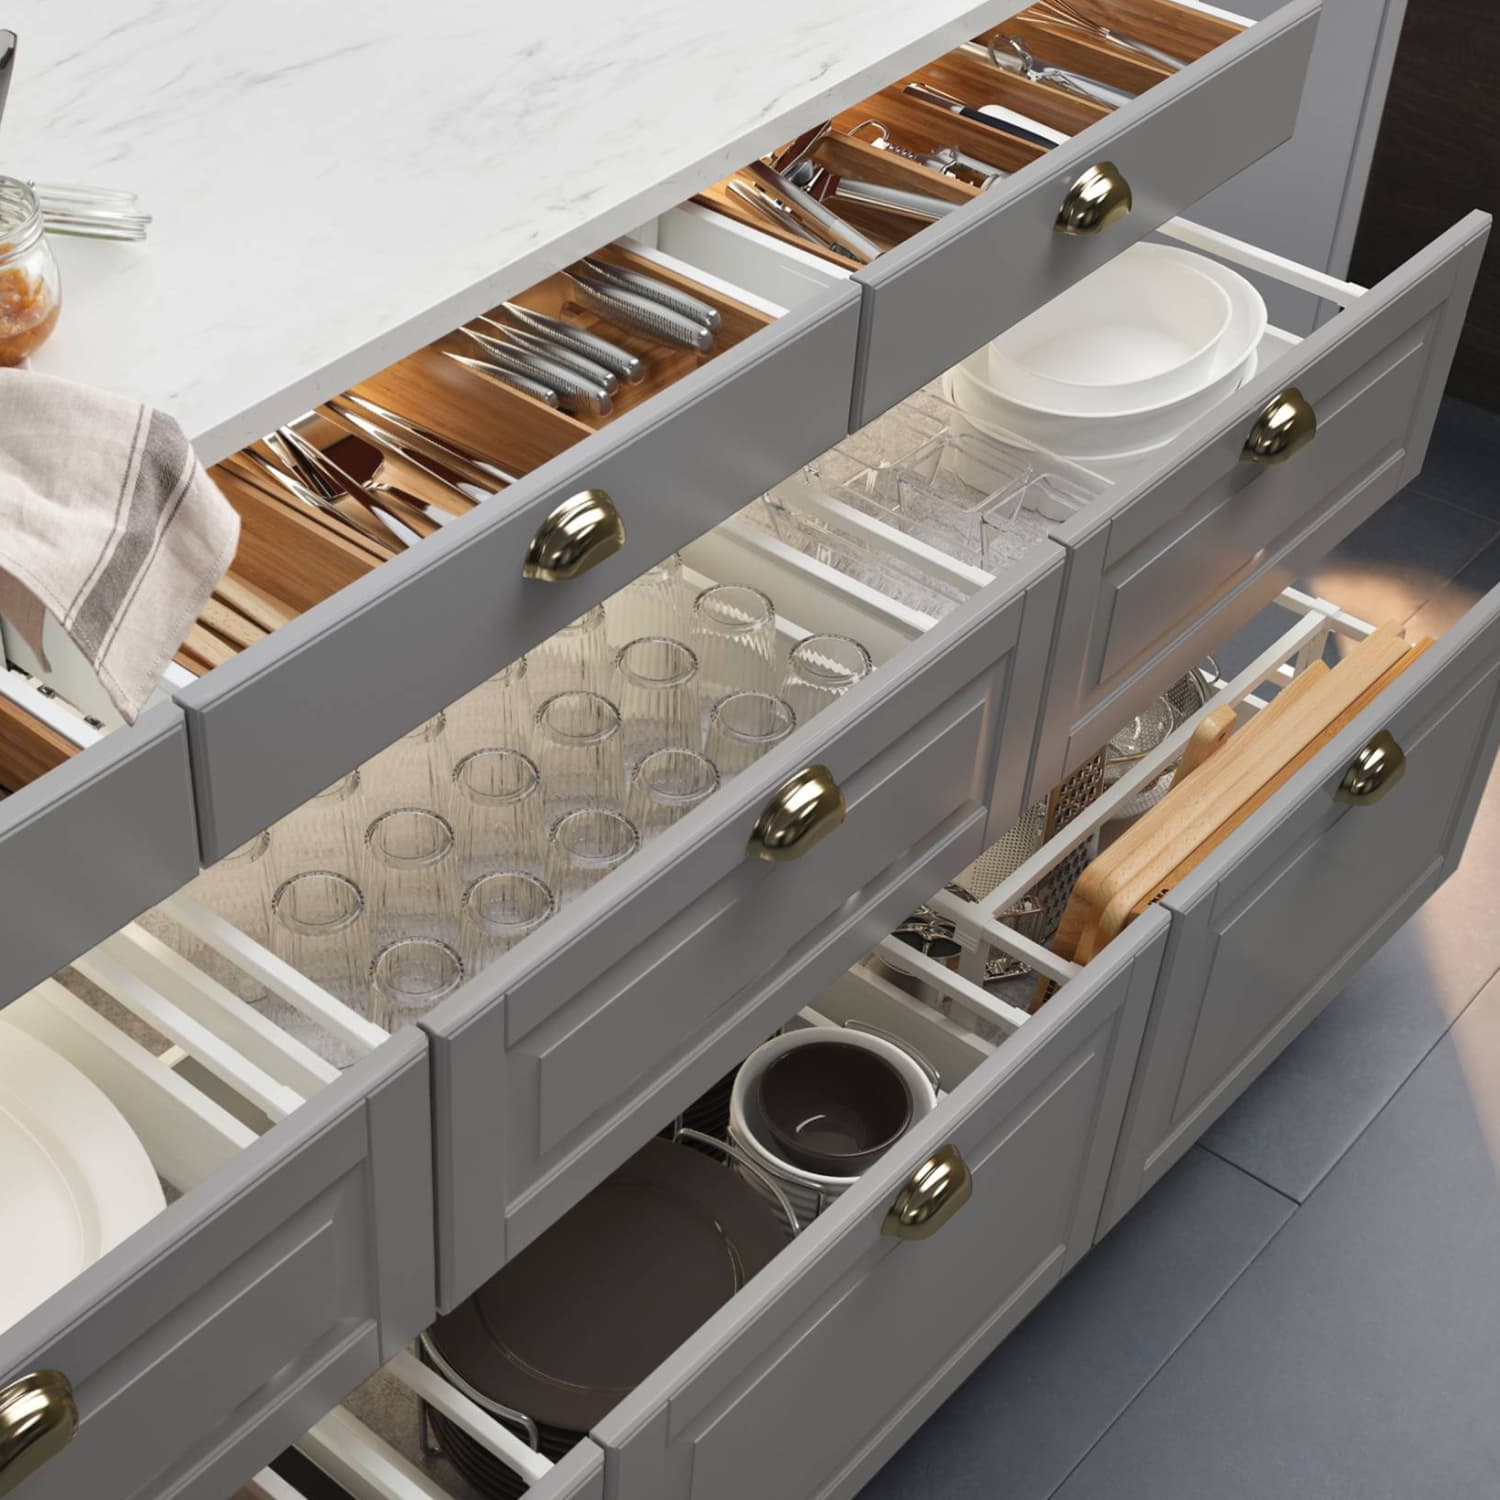 Do You Need Kitchen Cabinets with Four Drawers?